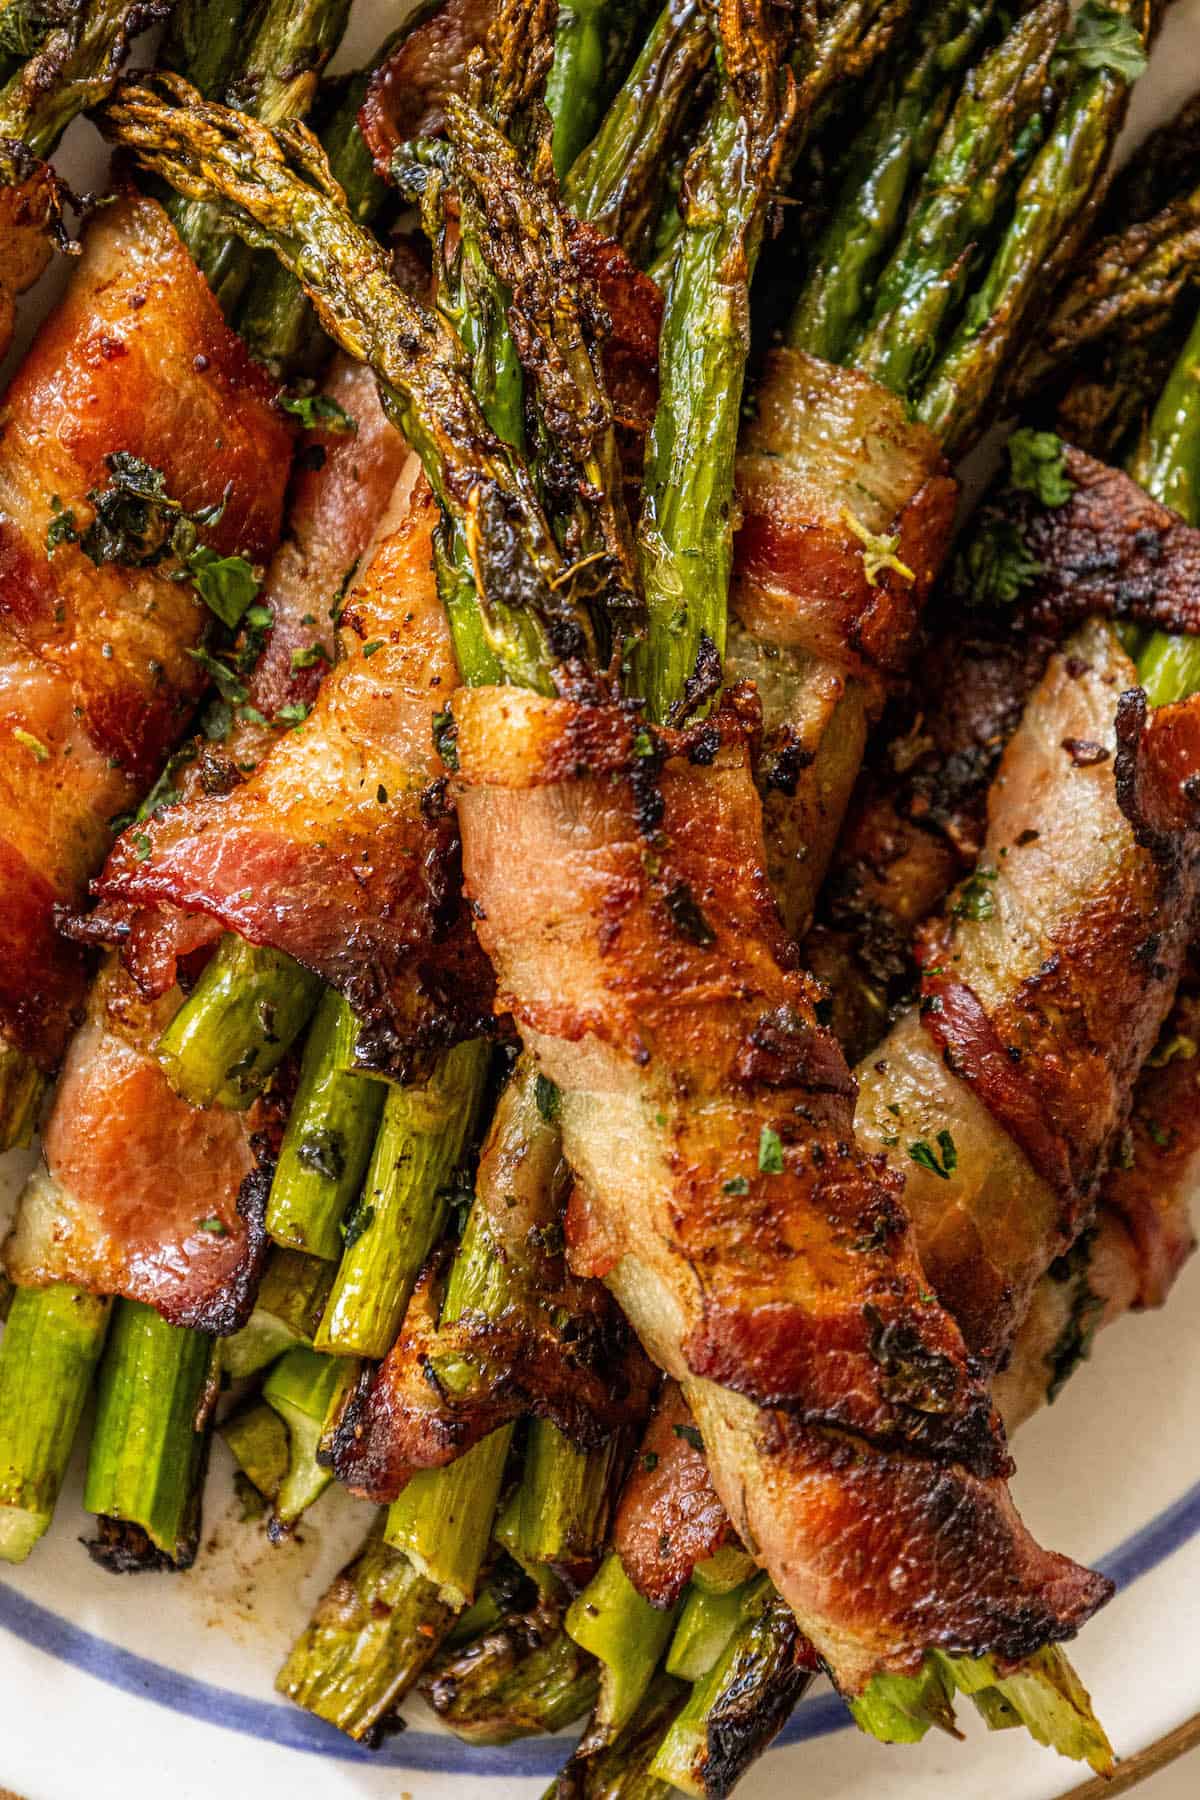 Bacon-wrapped asparagus coated in garlic on a plate.